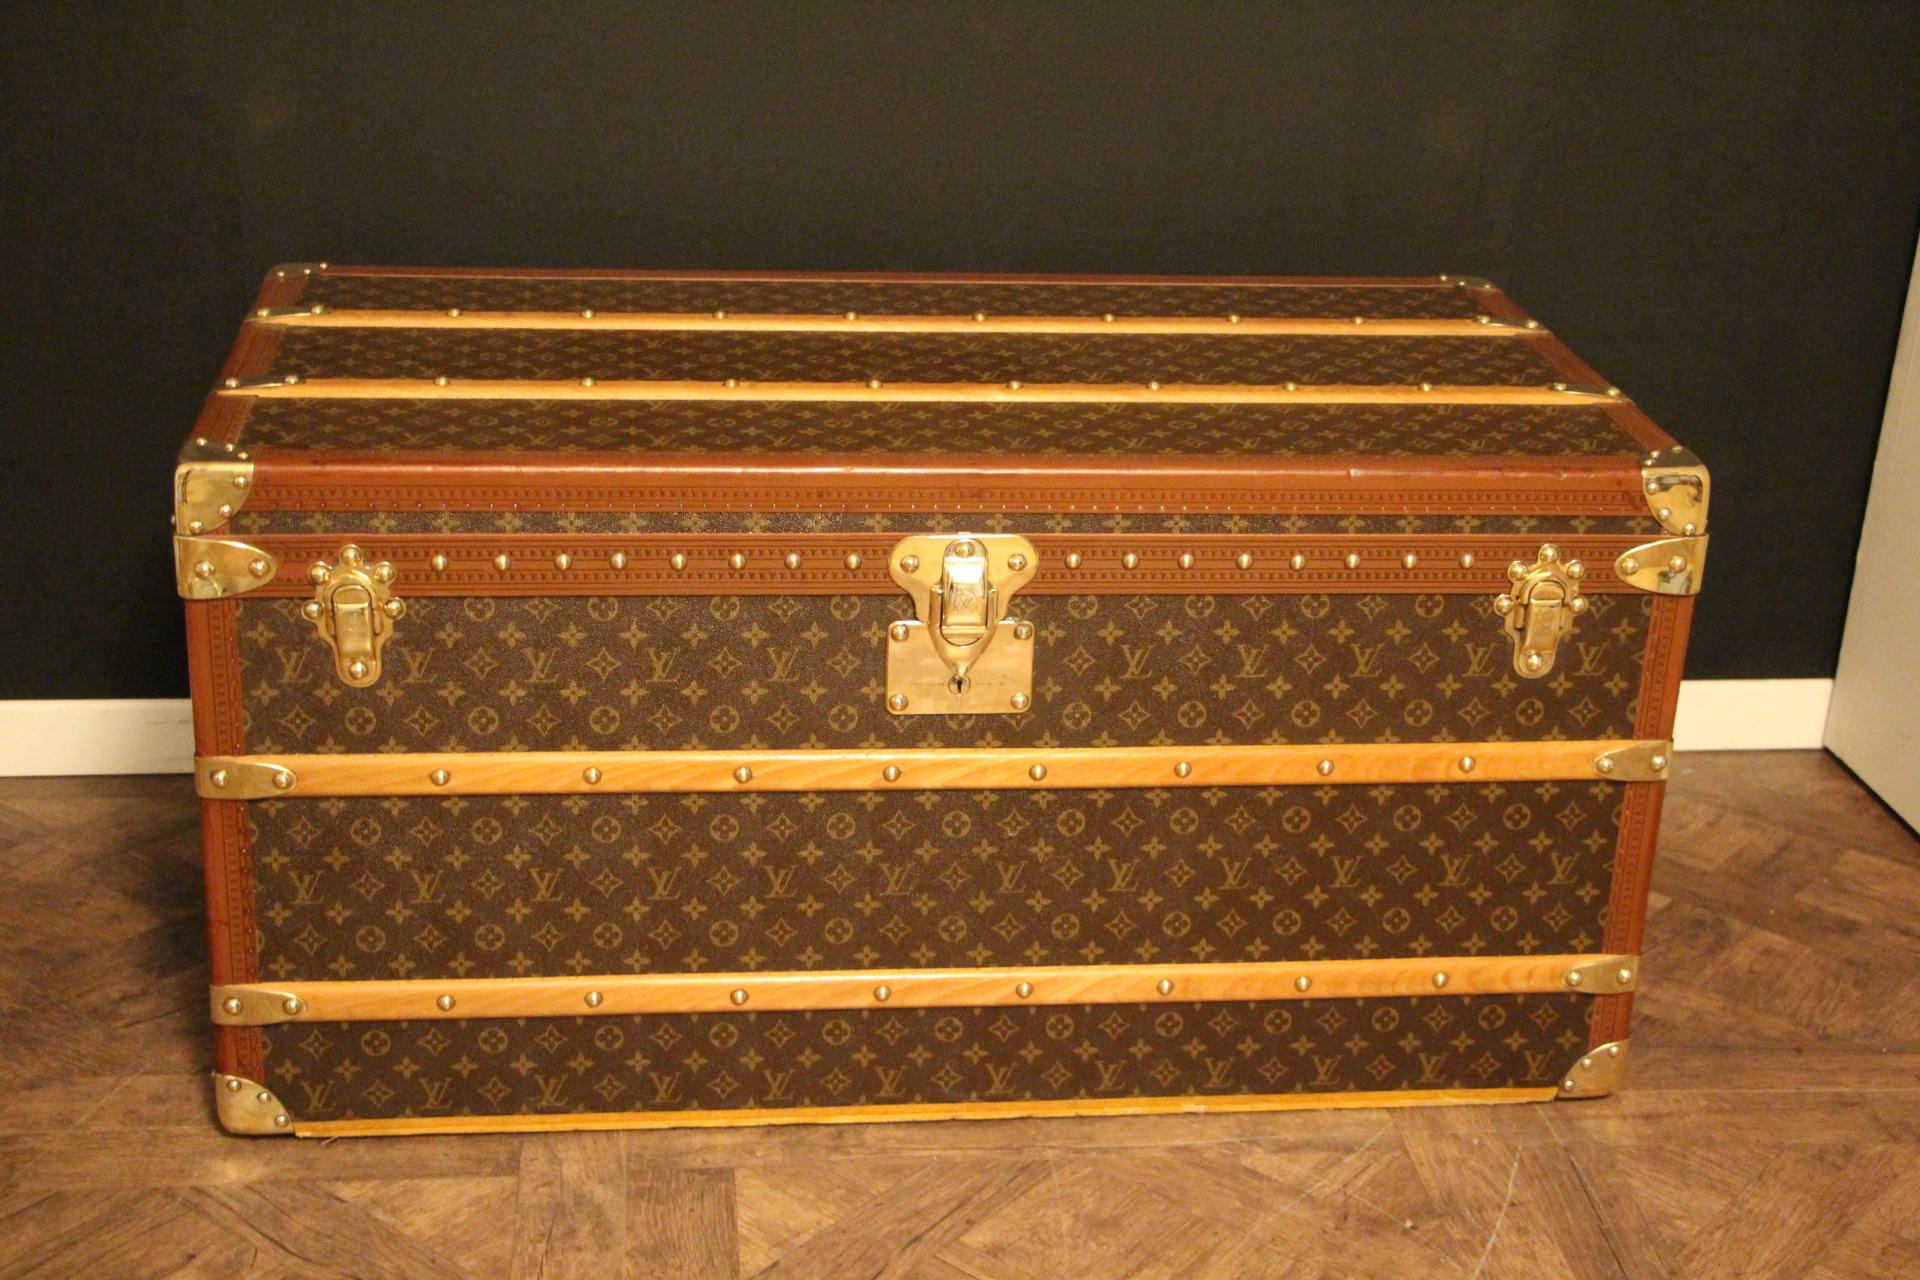 This superb Louis Vuitton steamer trunk features monogram canvas, honey color lozine trim, LV stamped solid brass locks and clasps, studs as well as leather side handles and brass corners. 
All its lozine trims are printed LV.
It has got a